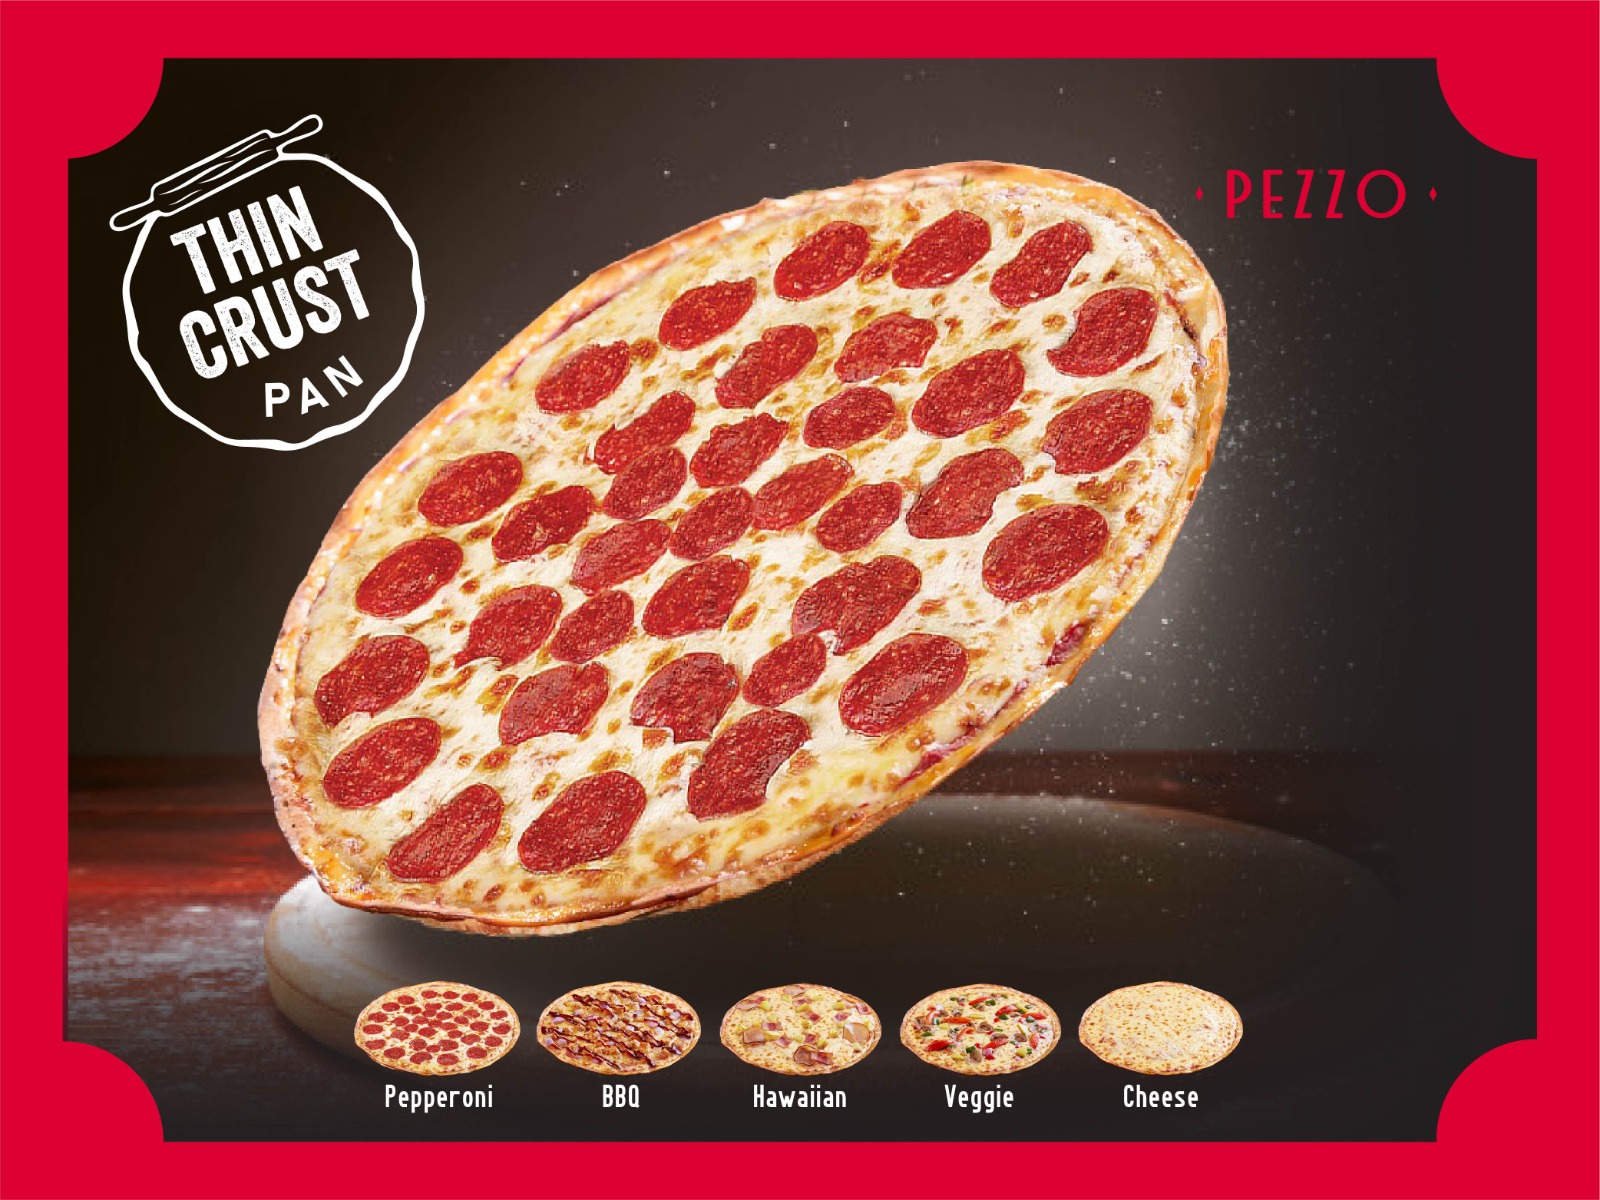 1 x 13” Thin Crust Pizza Pan at Pezzo - Get Deals, Cashback and Rewards with ShopBack GO